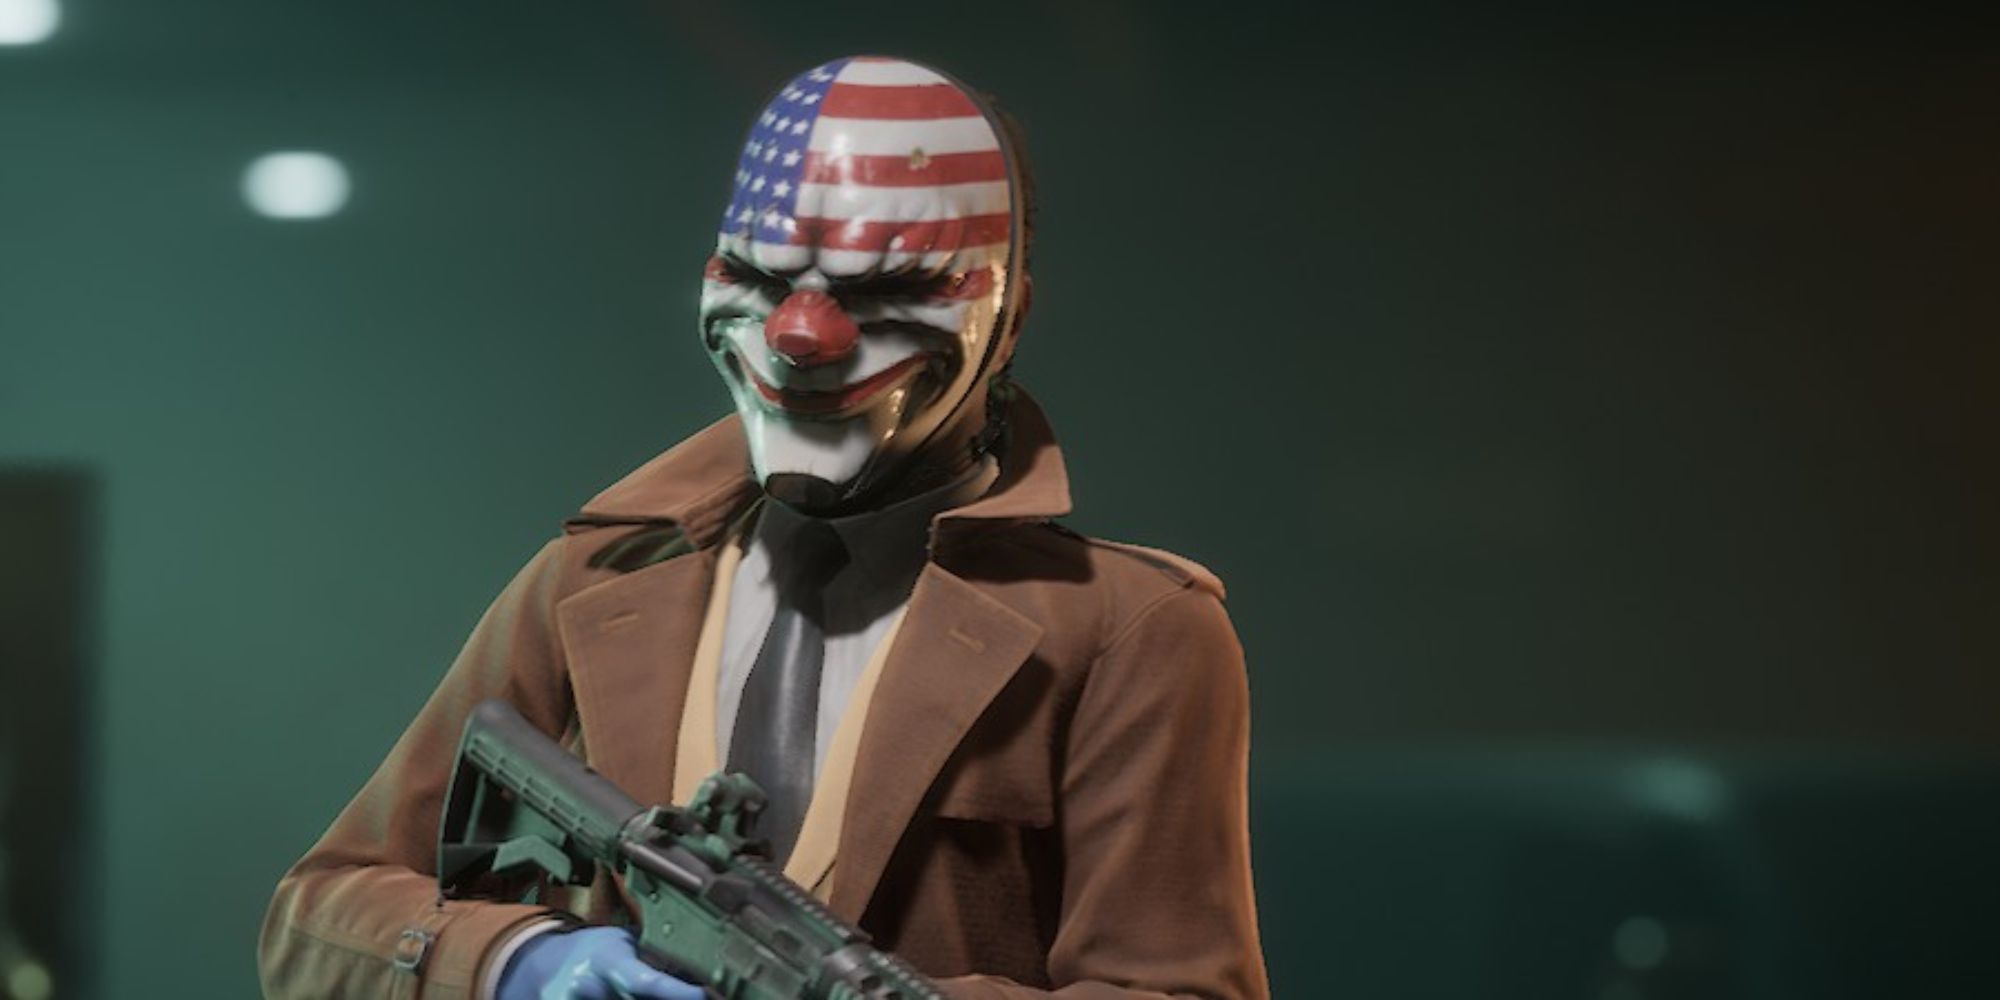 dallas with his default american flag clown mask in payday 3